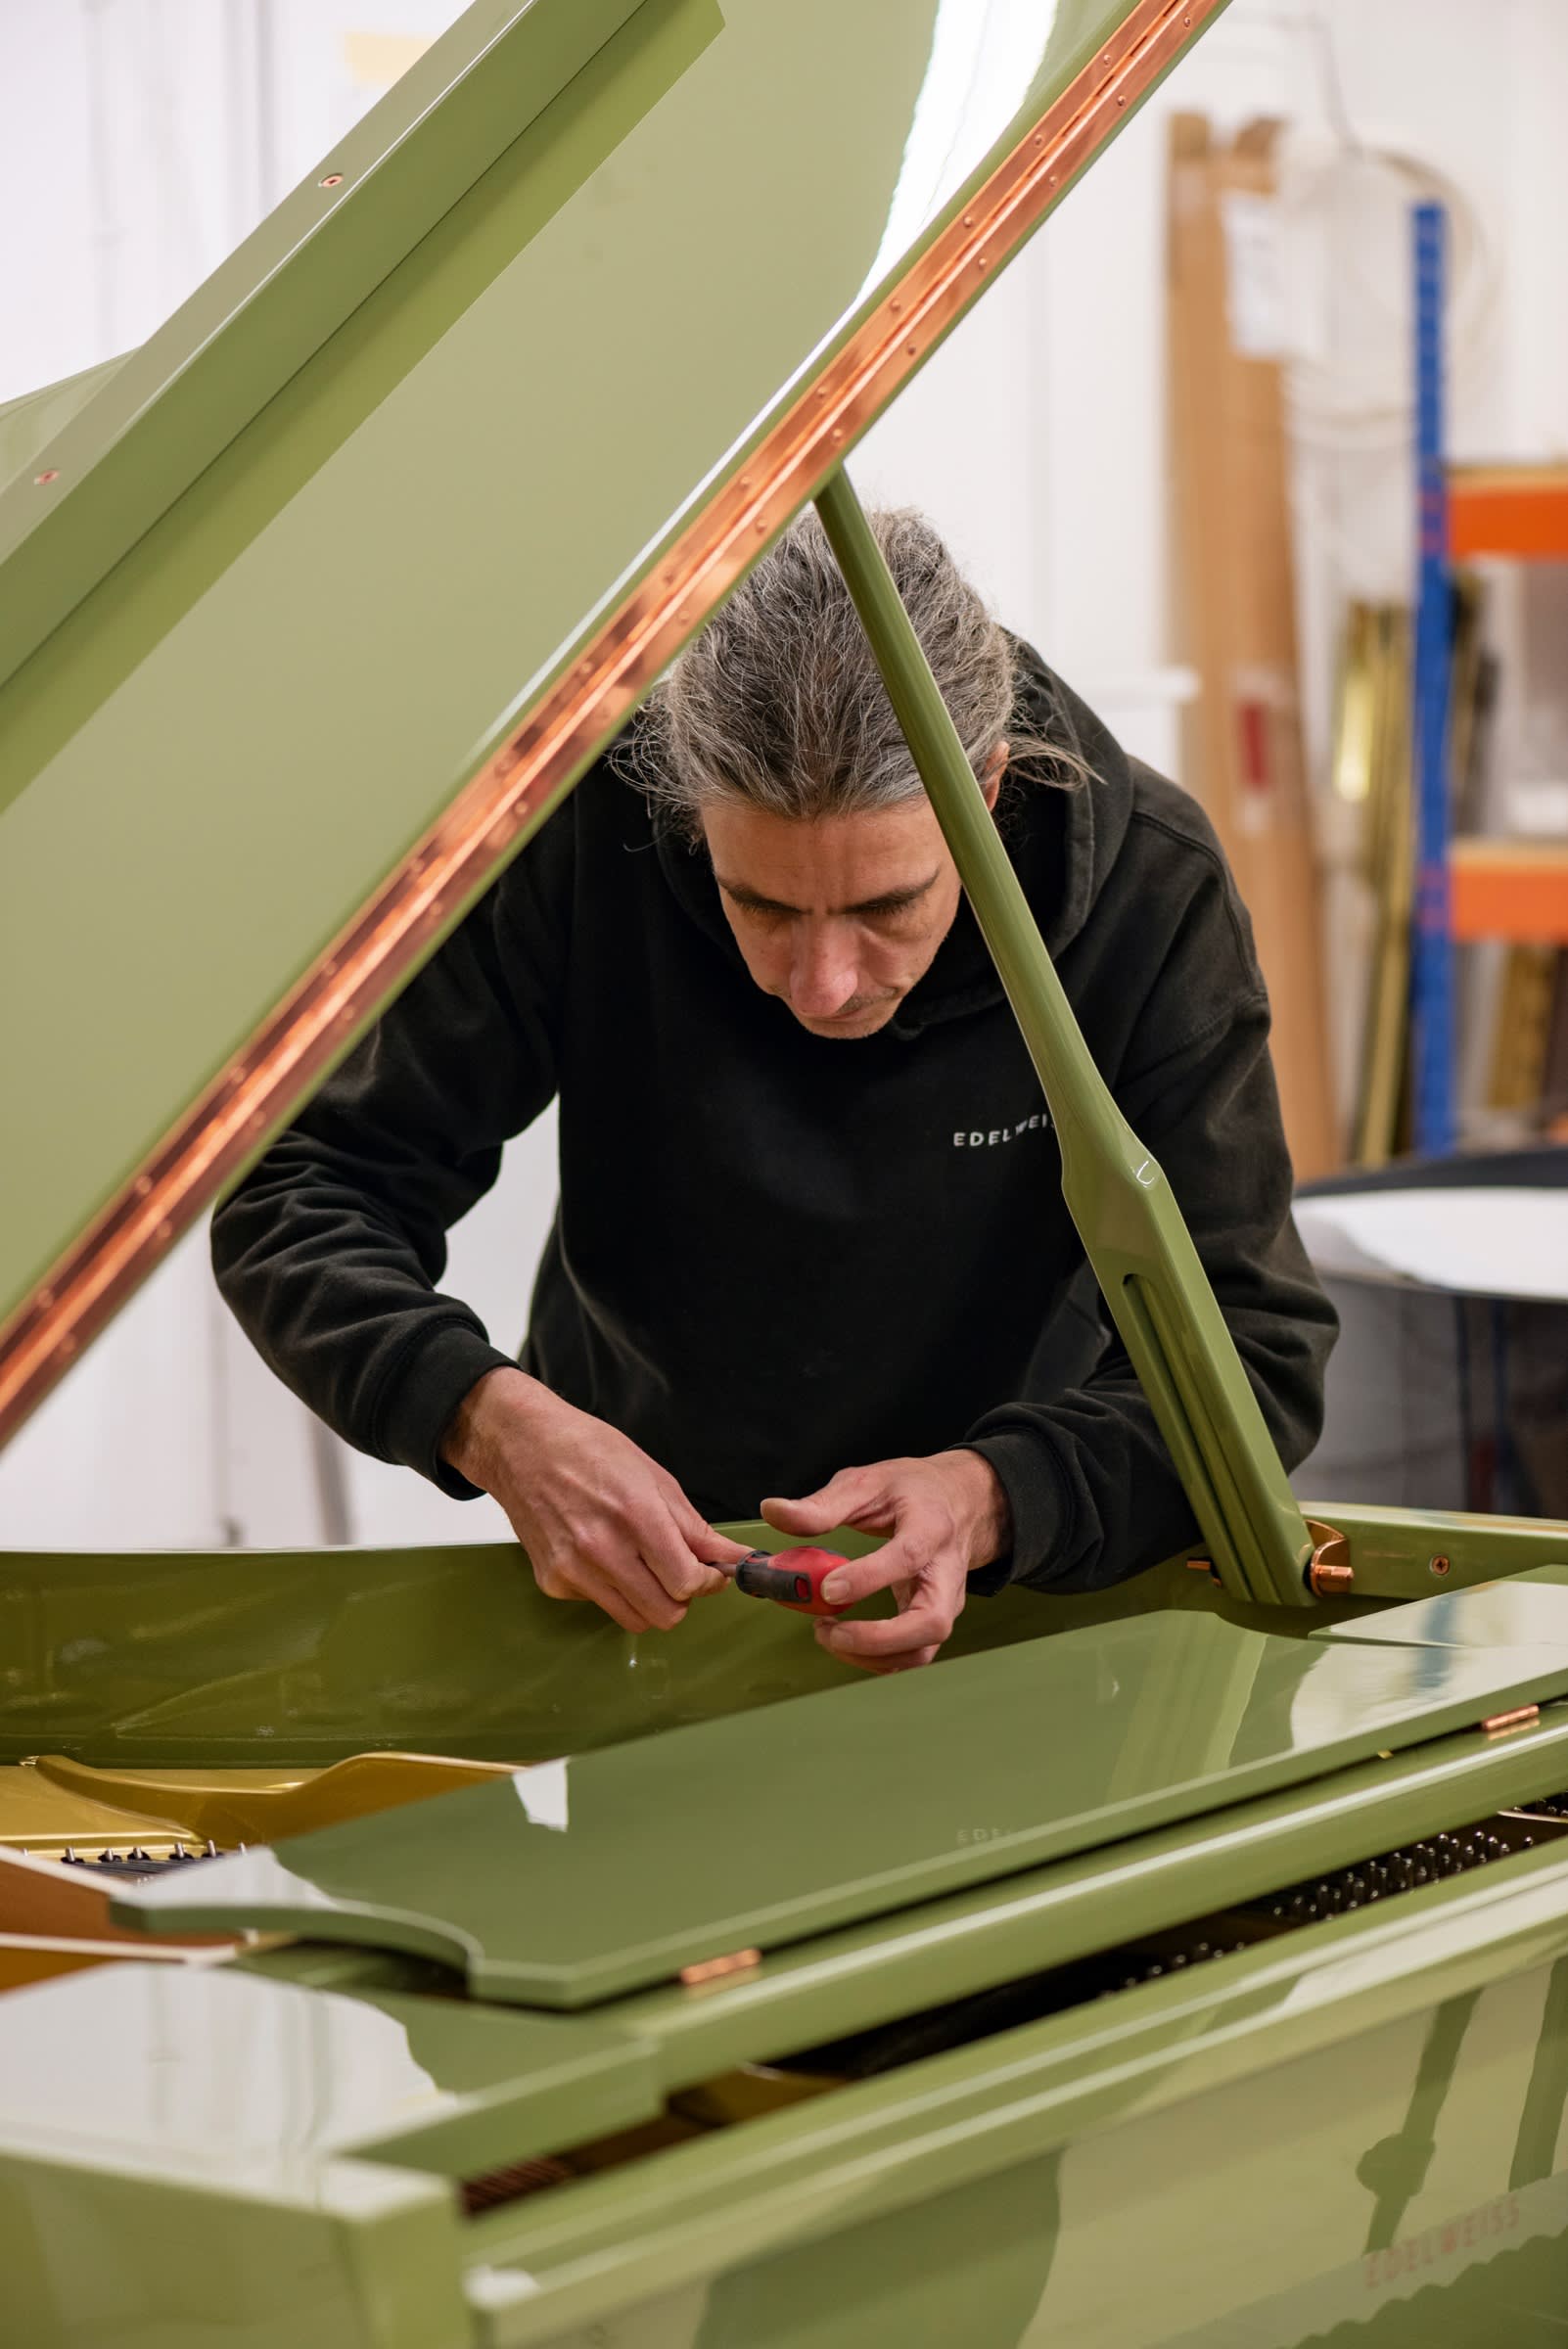 A craftsman finishes assembly on an Edelweiss piano